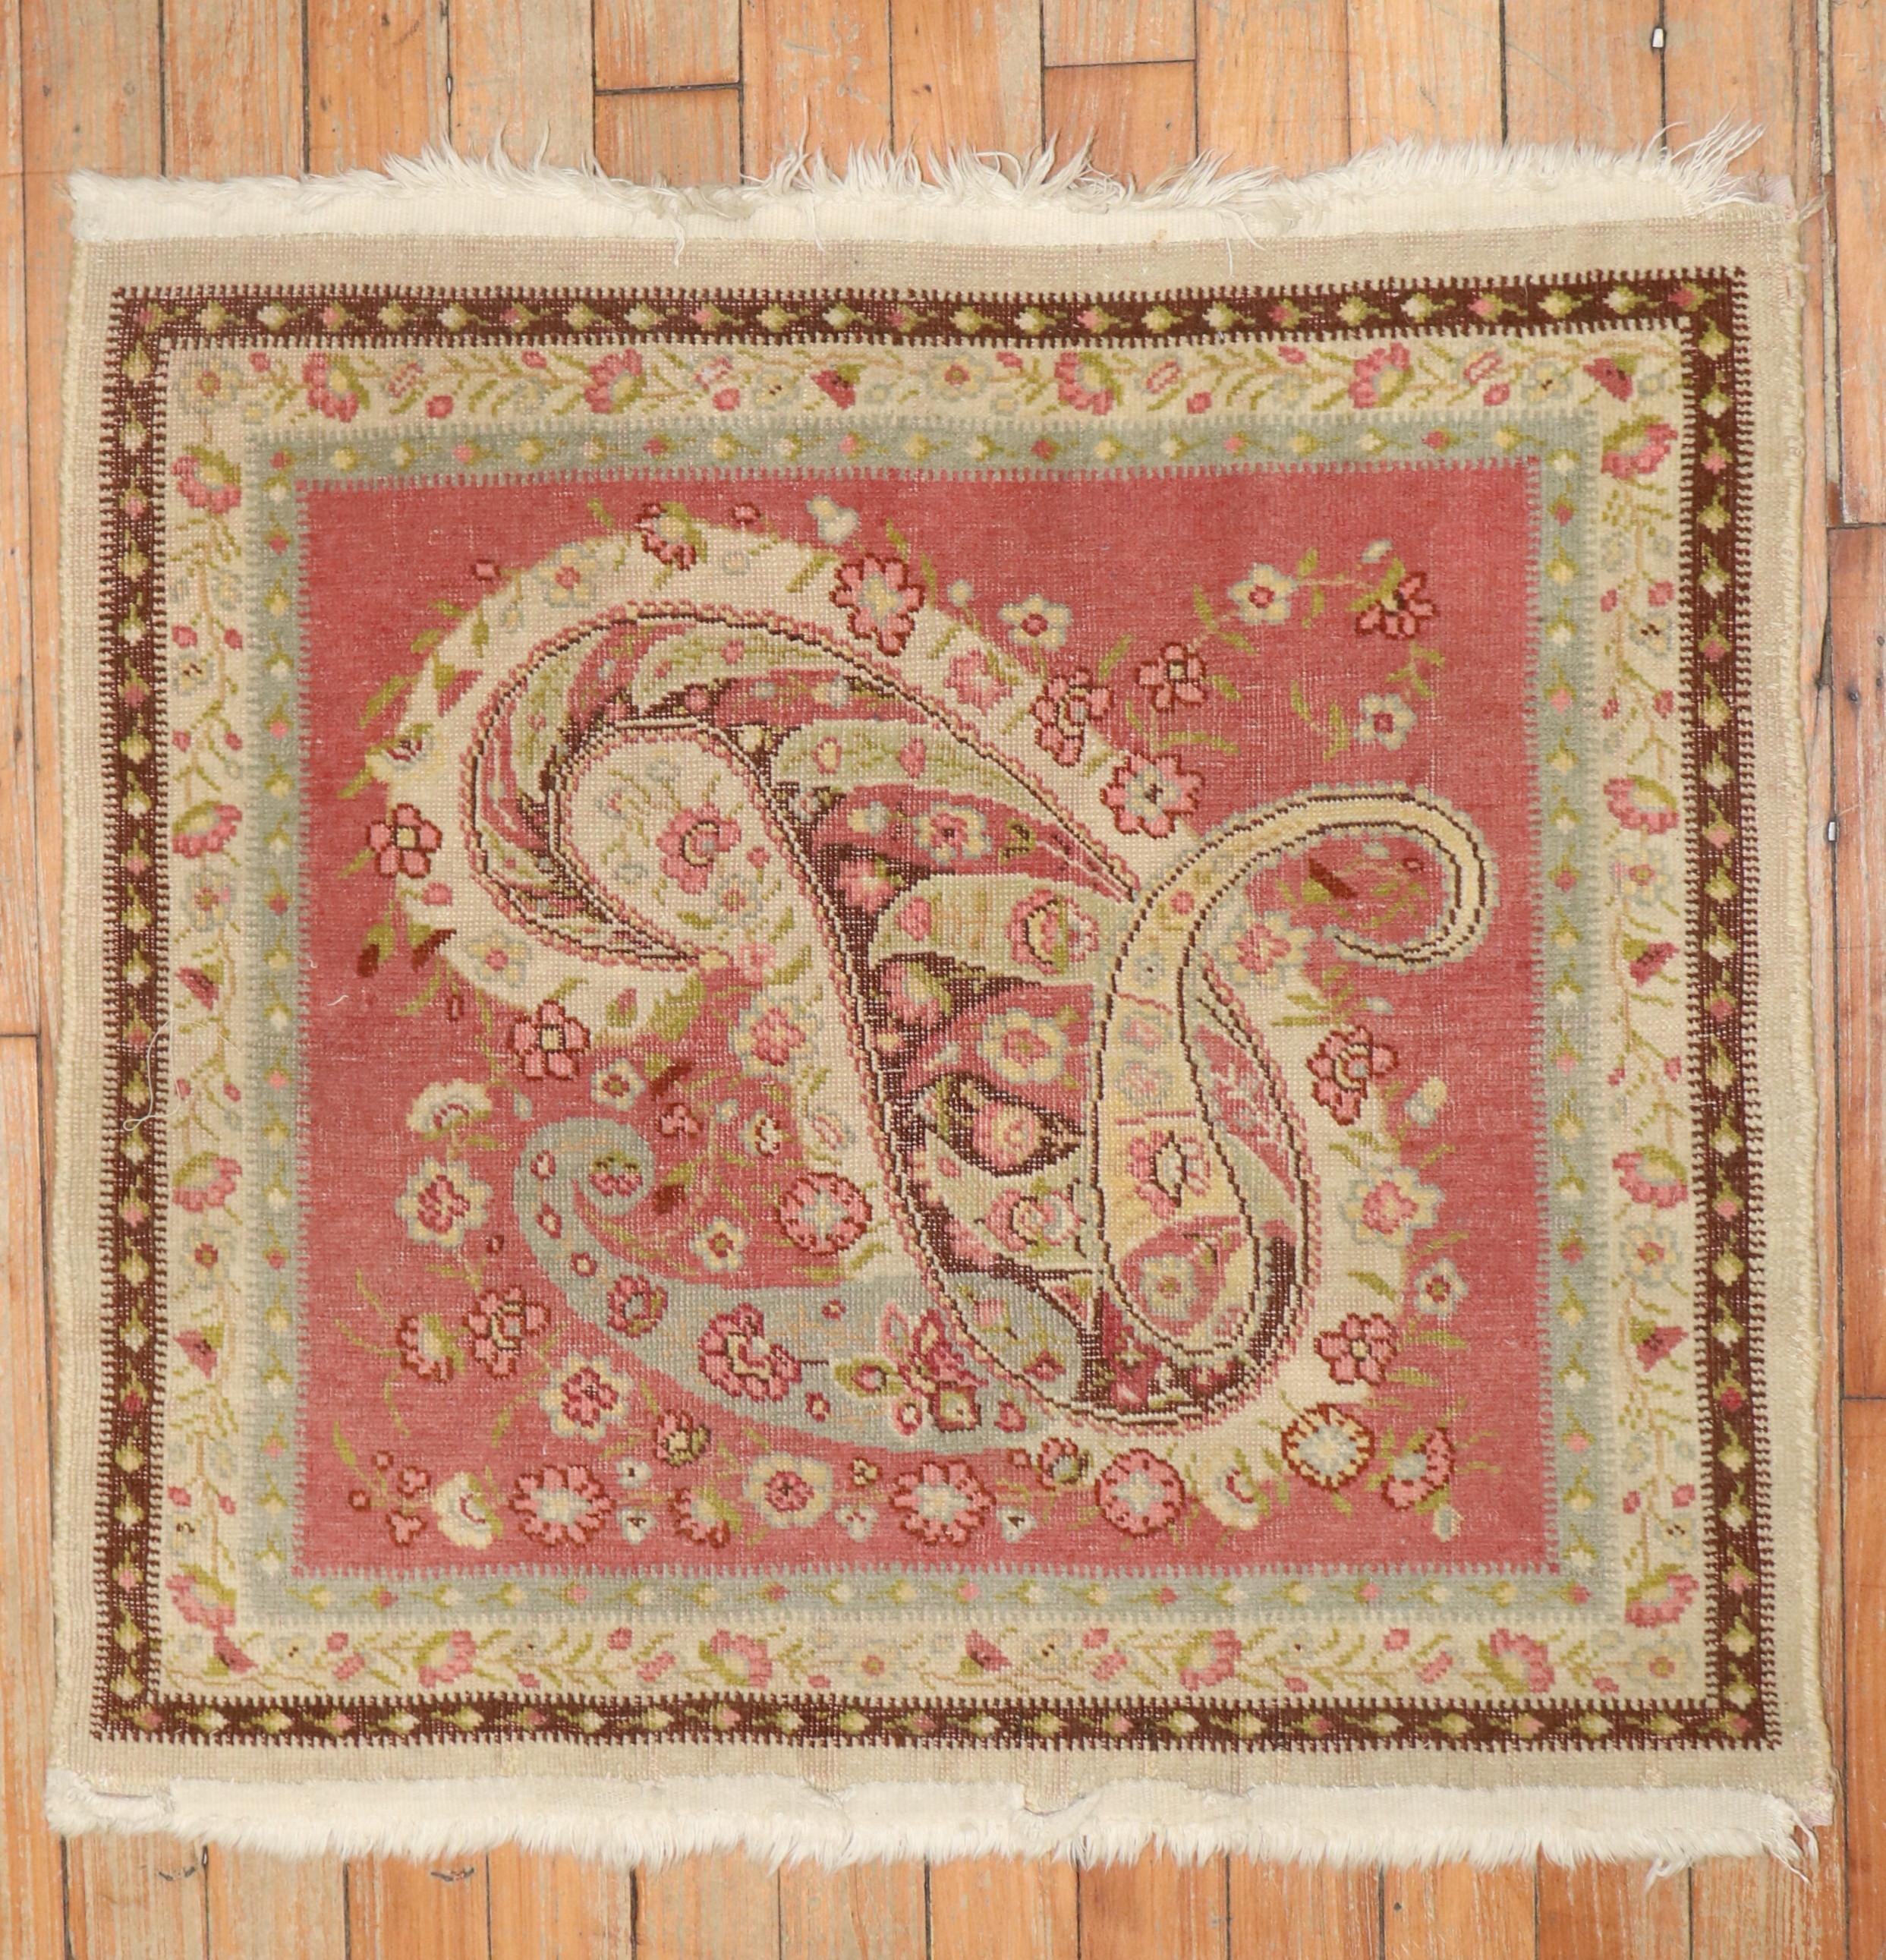 An early 20th-century floral Turkish Herekeh Rug

Measures: 2' x 2'3''.